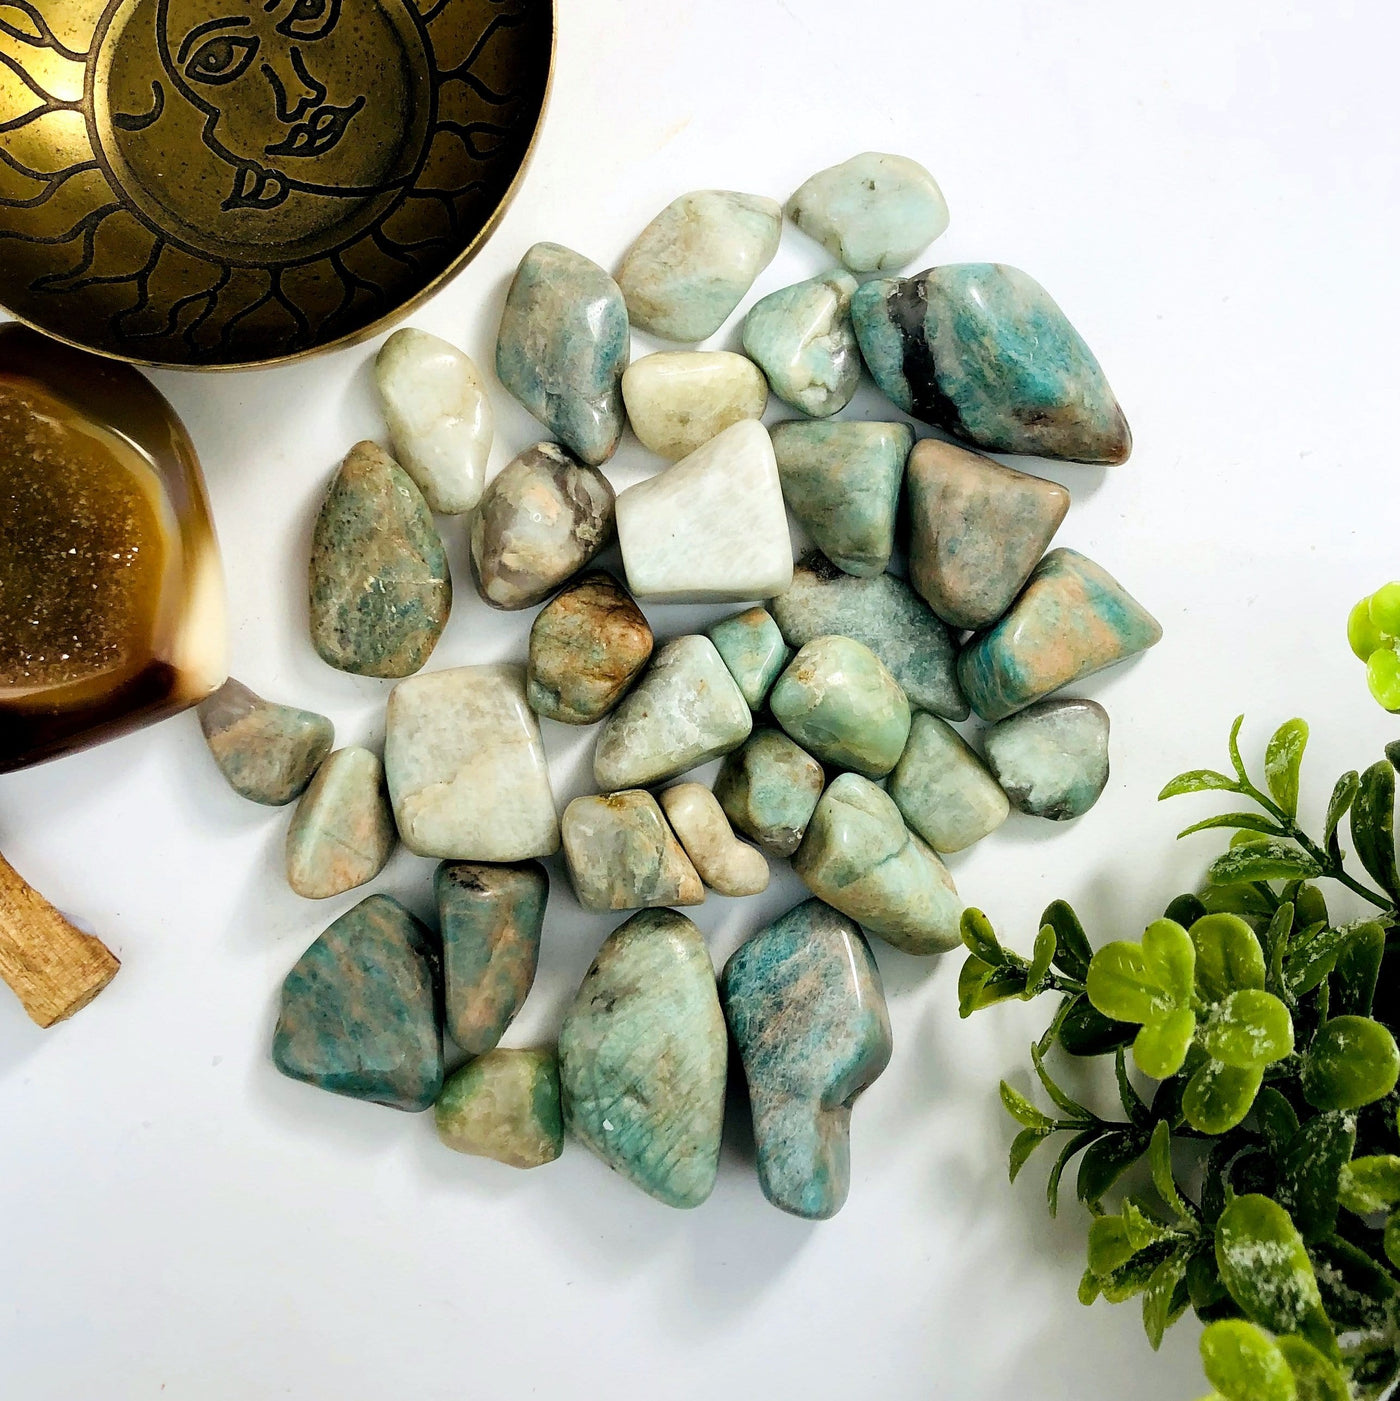 Tumbled stones displayed on a white background.